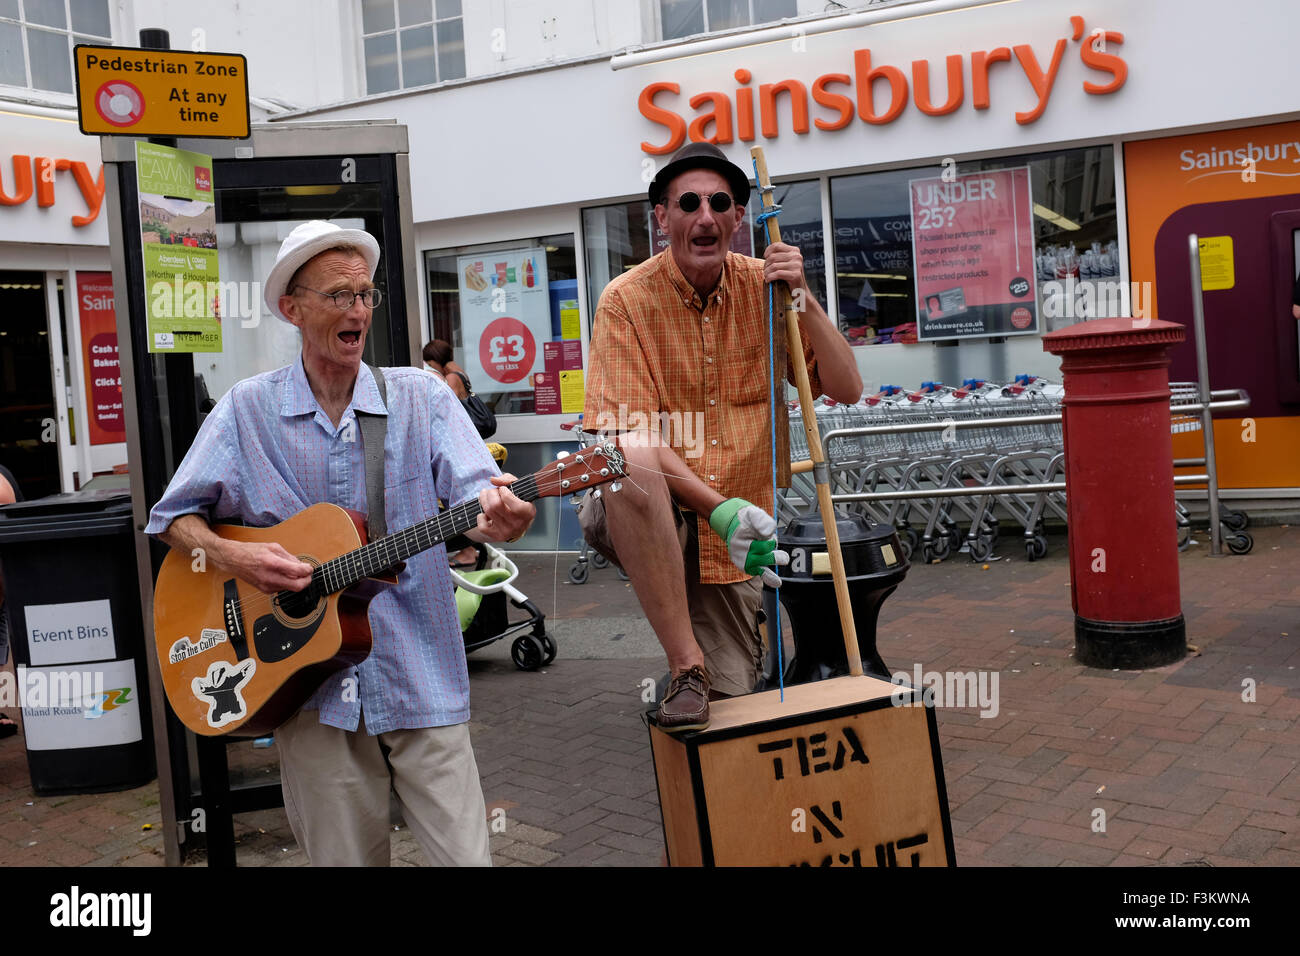 Cowes Week, 2015, Isle of Wight buskers skiffle band Cowes Week, 2015, Isle of Wight Tiffins Sandwhich shop Yacht Racing, Shore side entertainments, Bands, Yacht Club scenes, 2015, Cowes Week, Isle of Wight, England, UK, Stock Photo